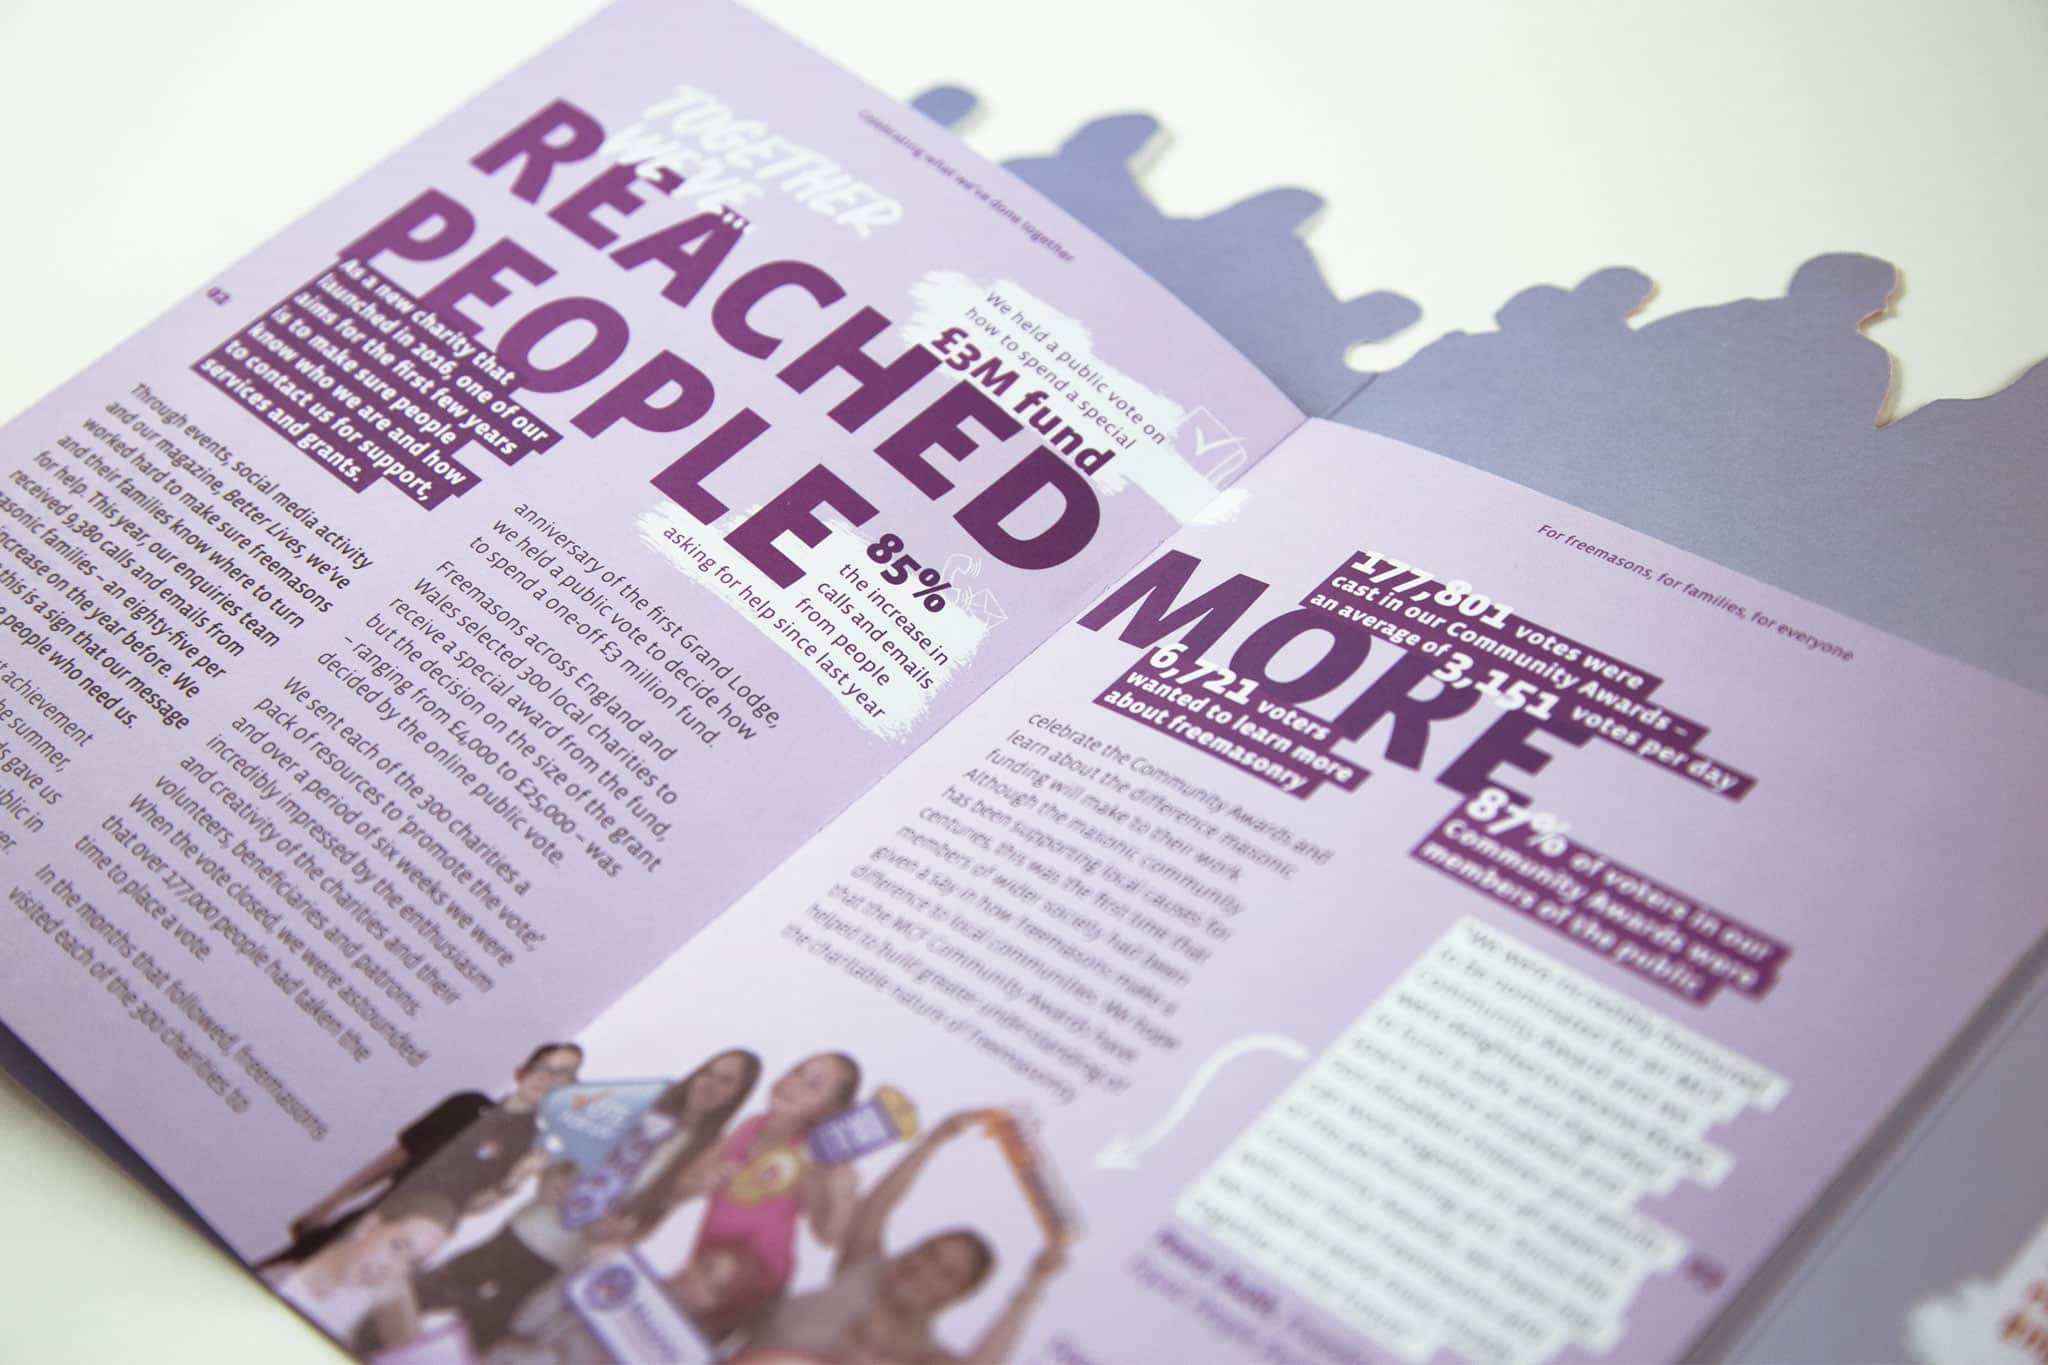 ave design studio london graphic design and website design and development for charities and not-for-profit organisations Masonic Charitable Foundation impact report